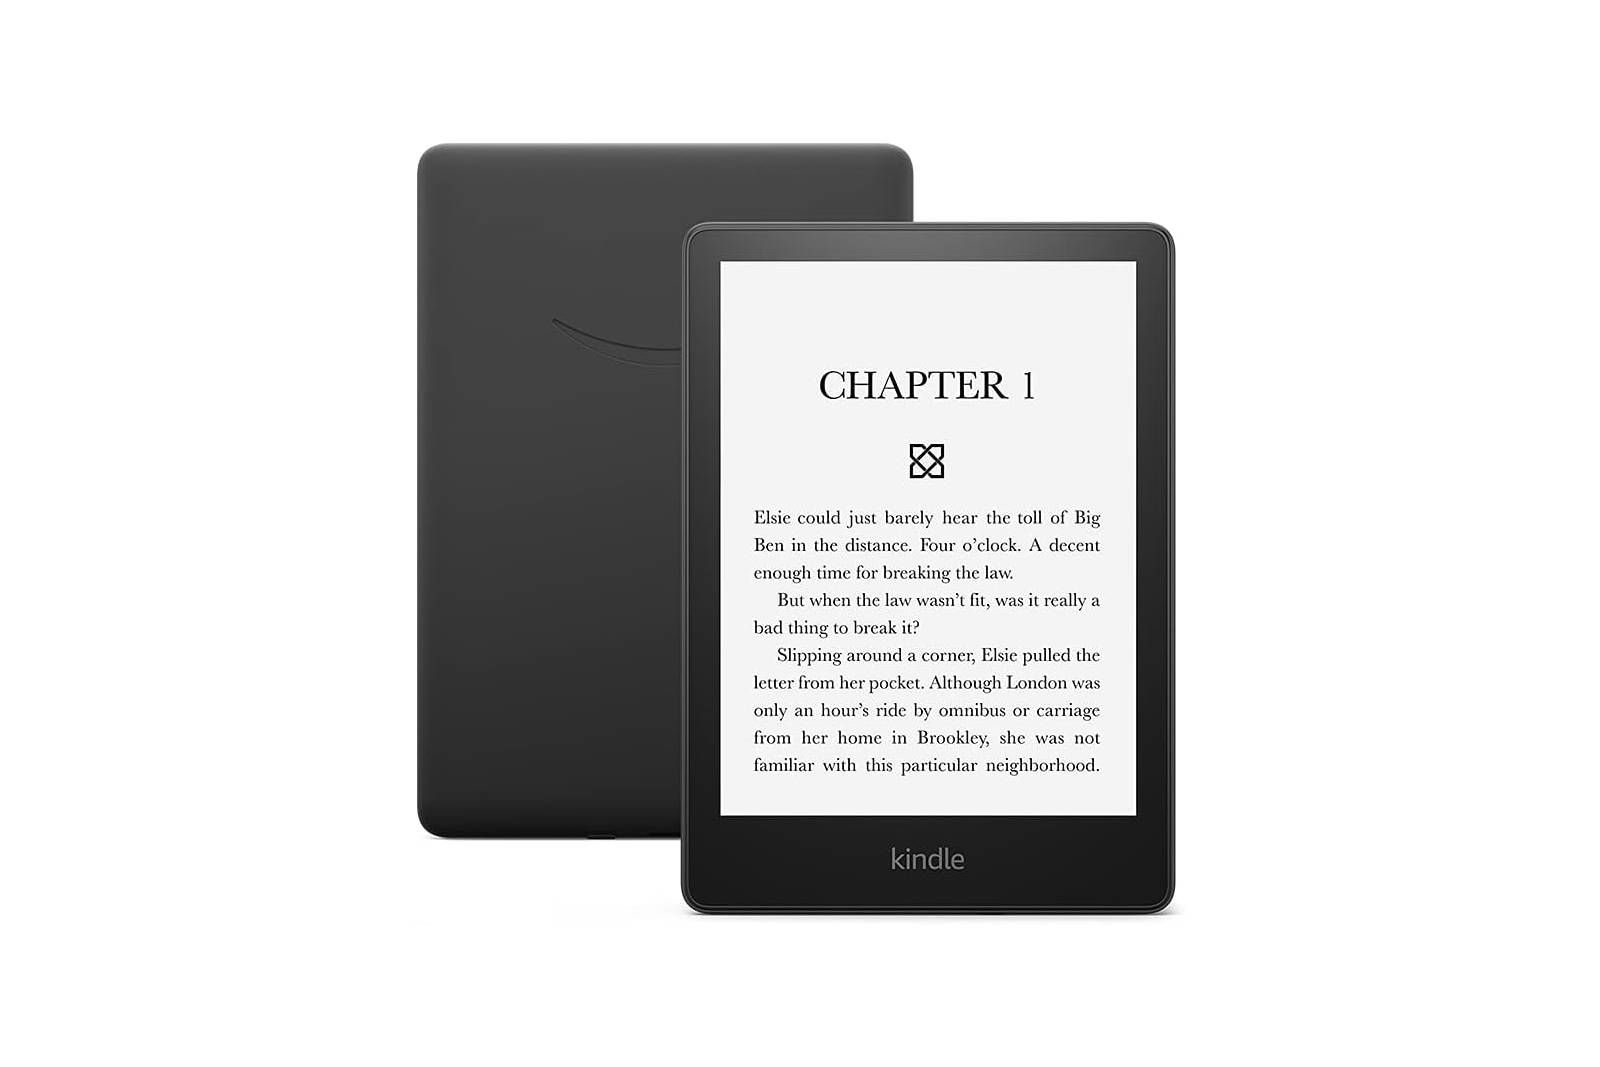 Brighter, sharper, and ad-filled: The Kindle Paperwhite review